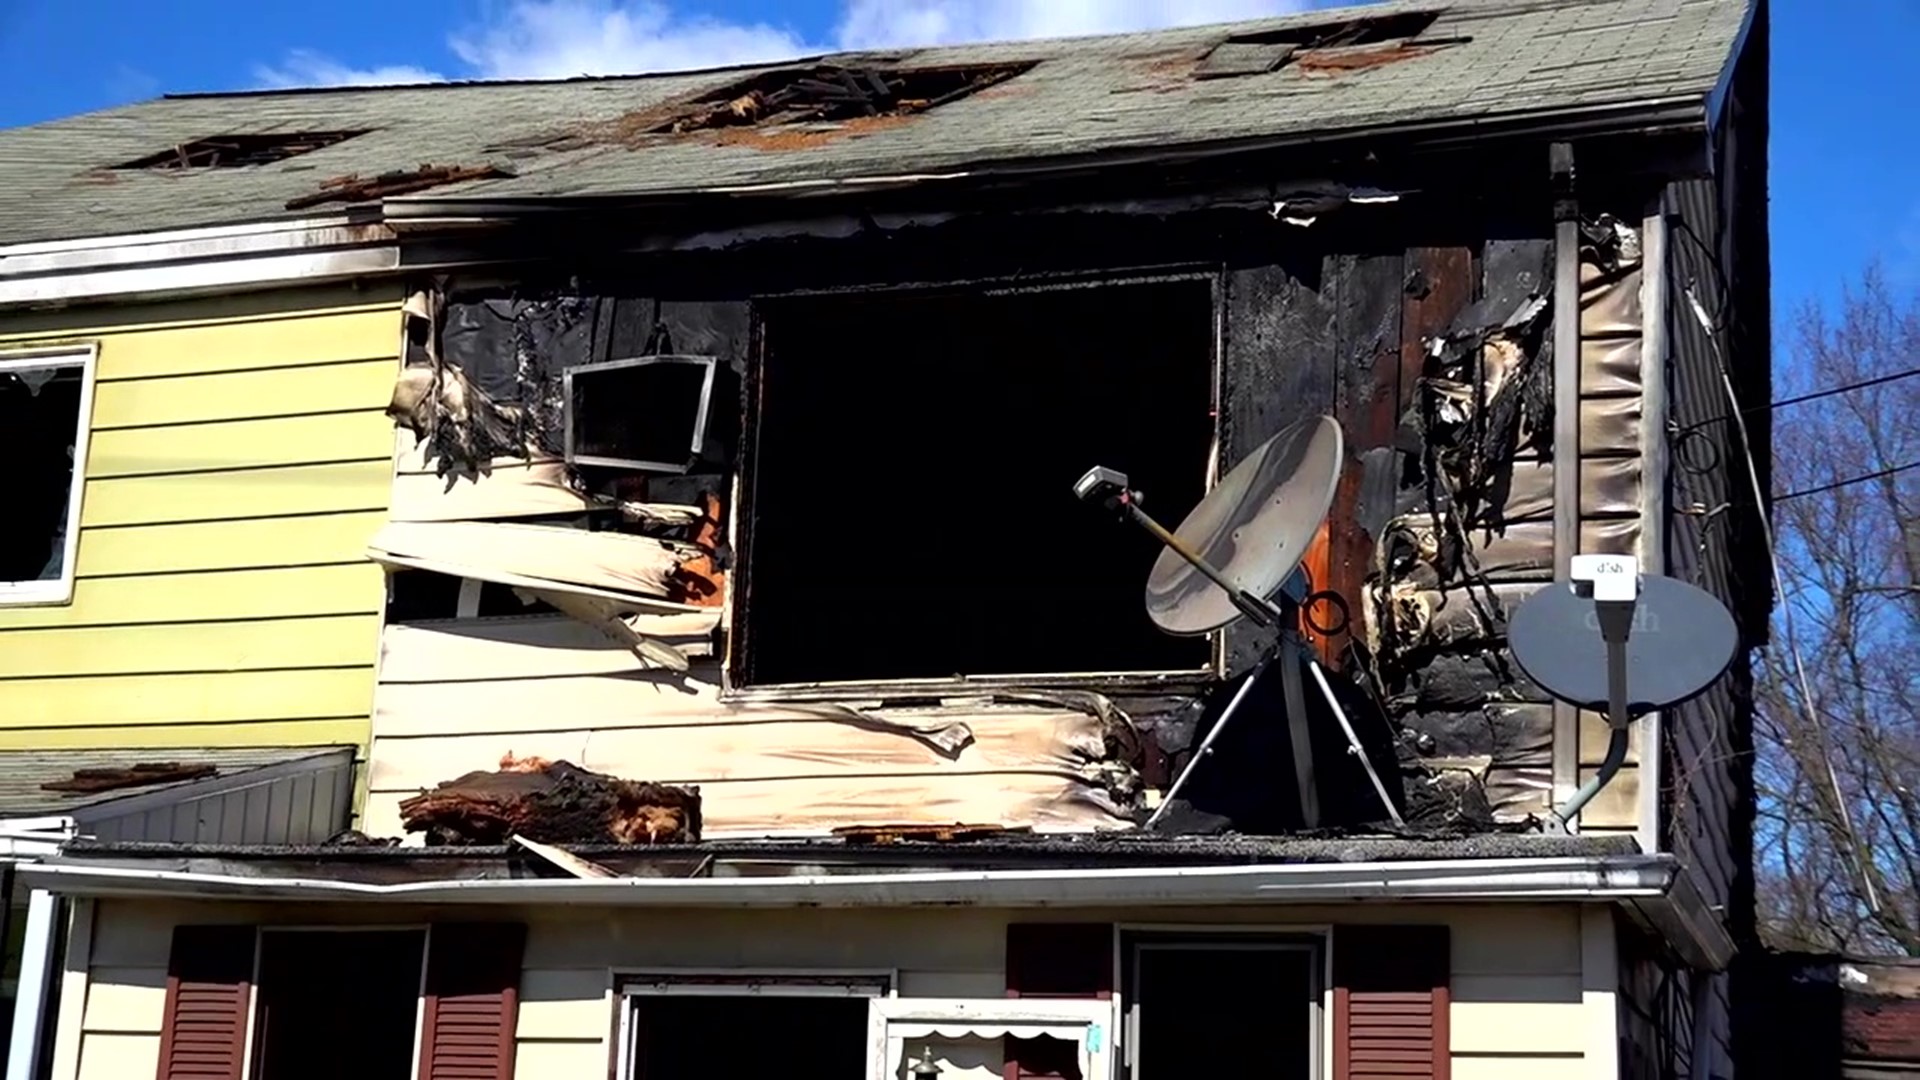 A series of suspicious fires in one part of Schuylkill County has fire officials taking action, making the community safer with fire prevention efforts.